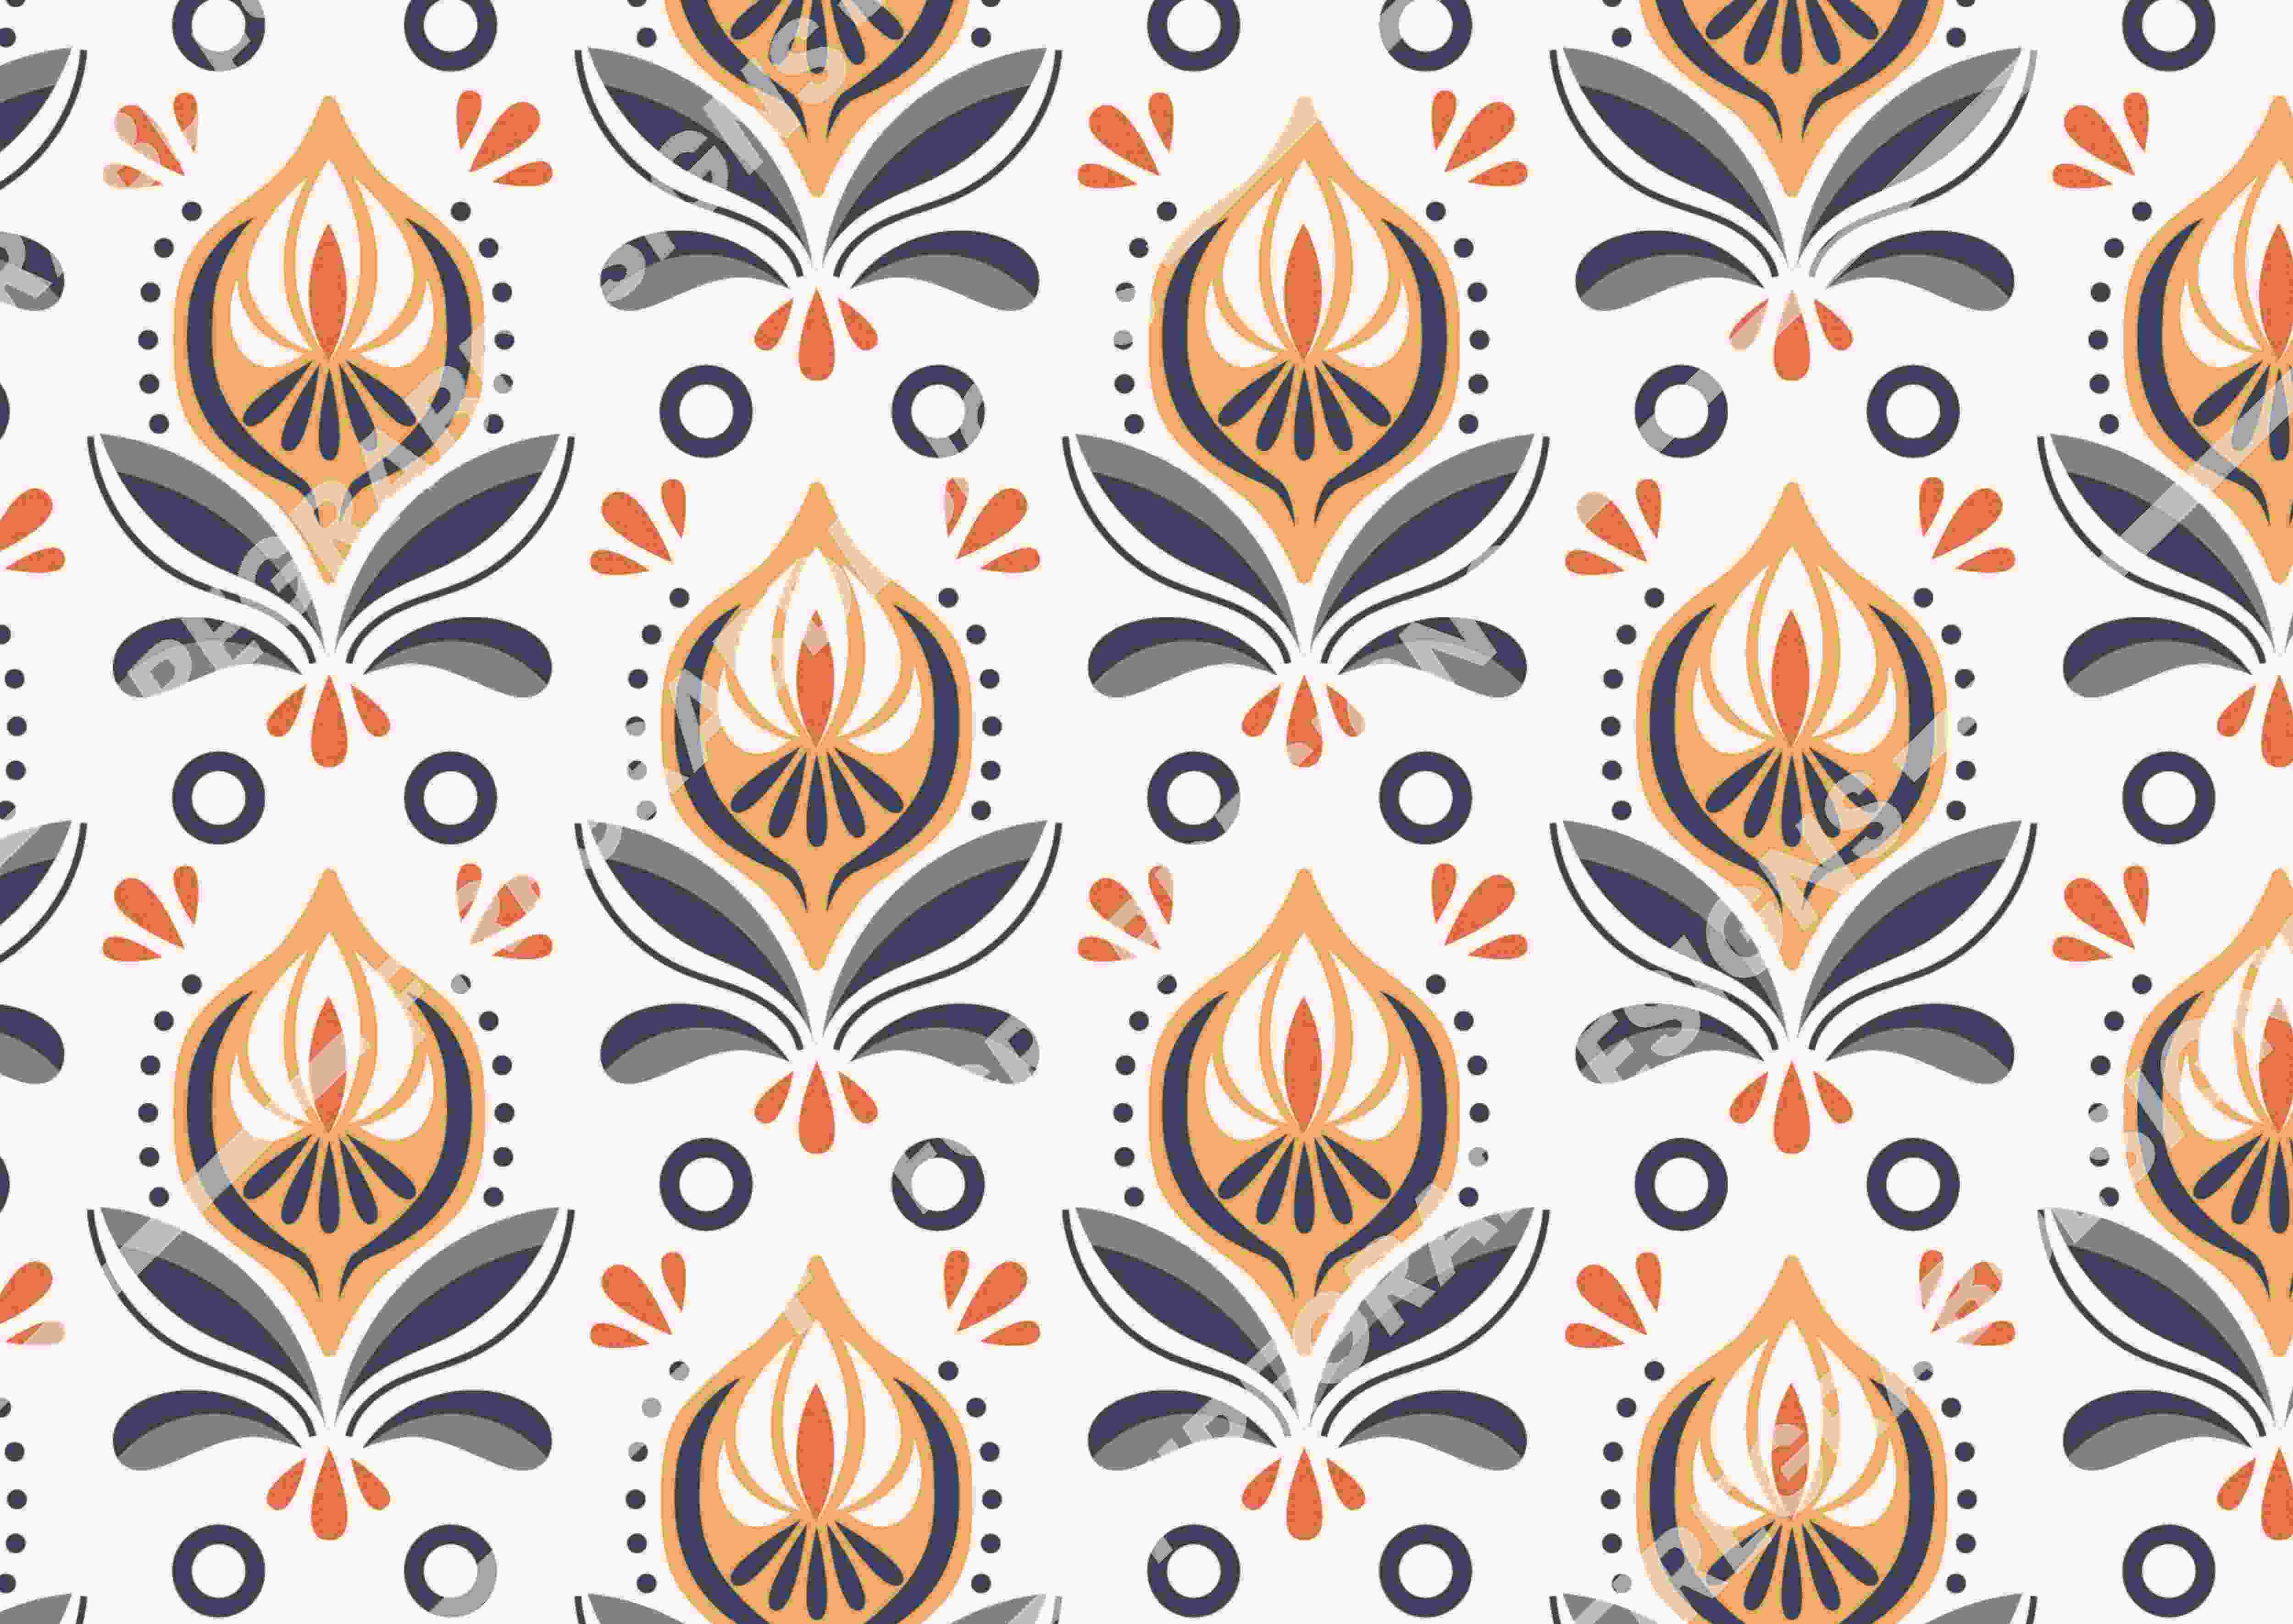 Orange and blue floral pattern on a white background.